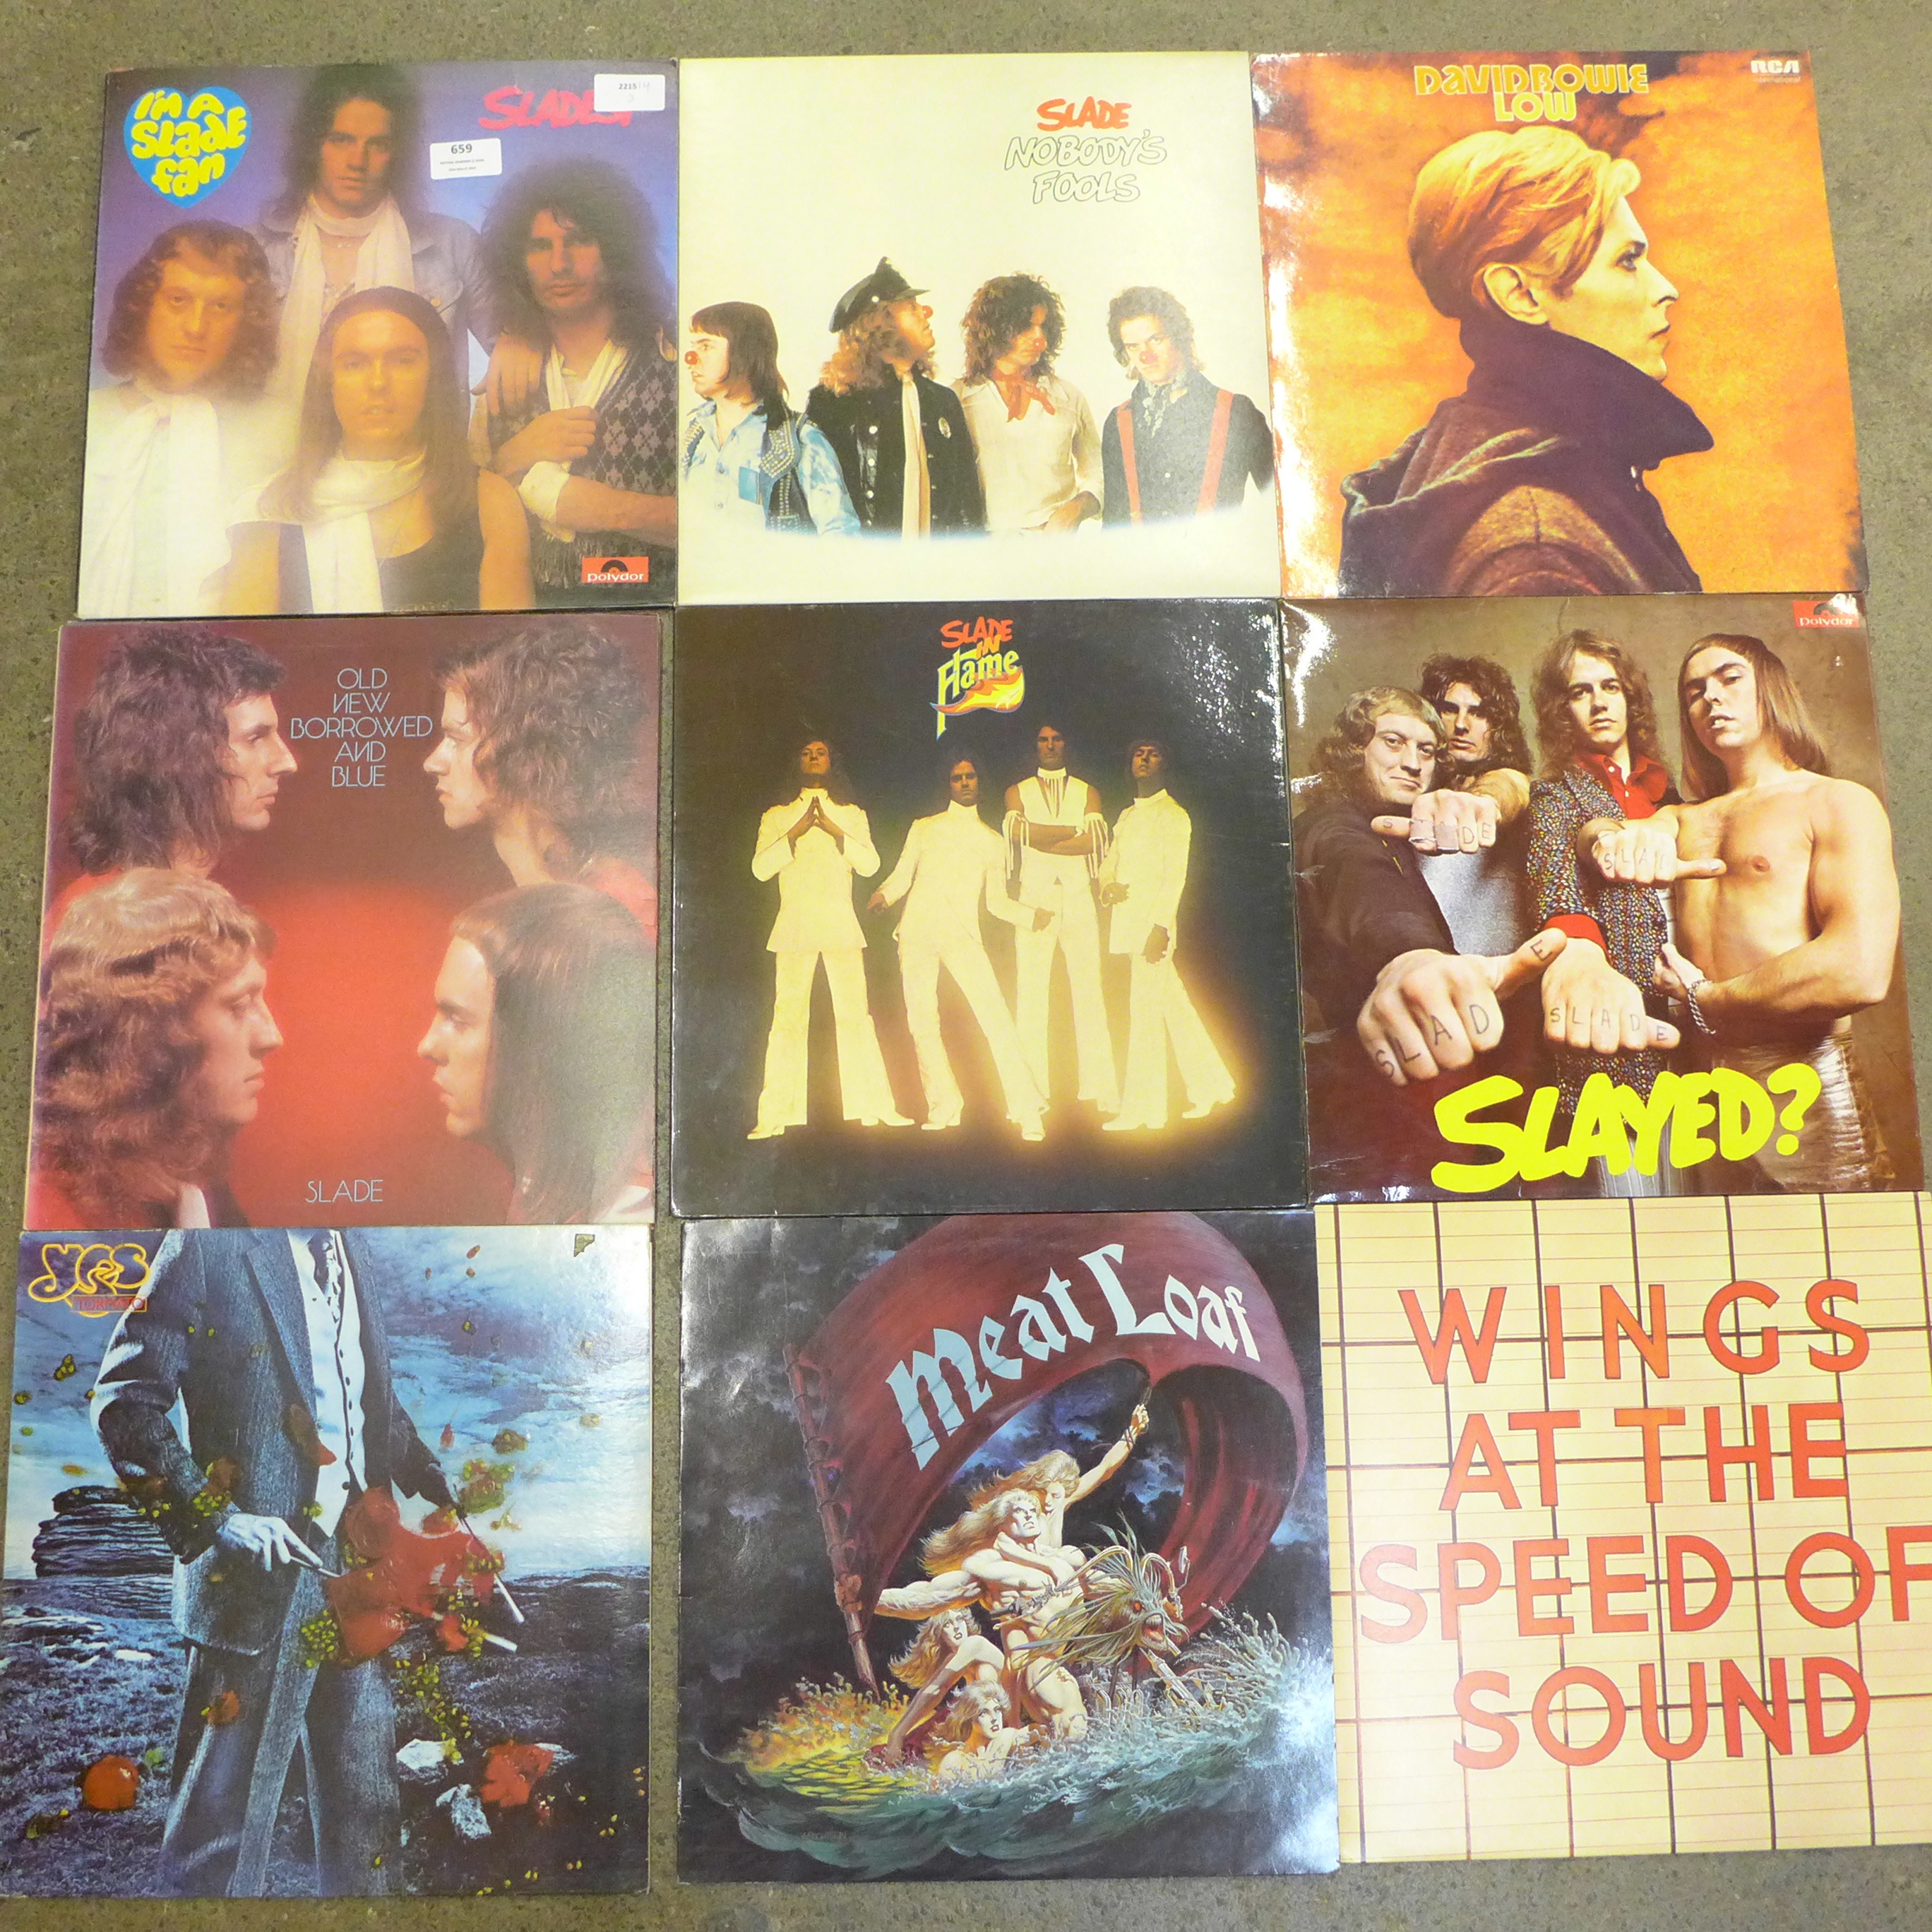 A collection of ten rock LP records